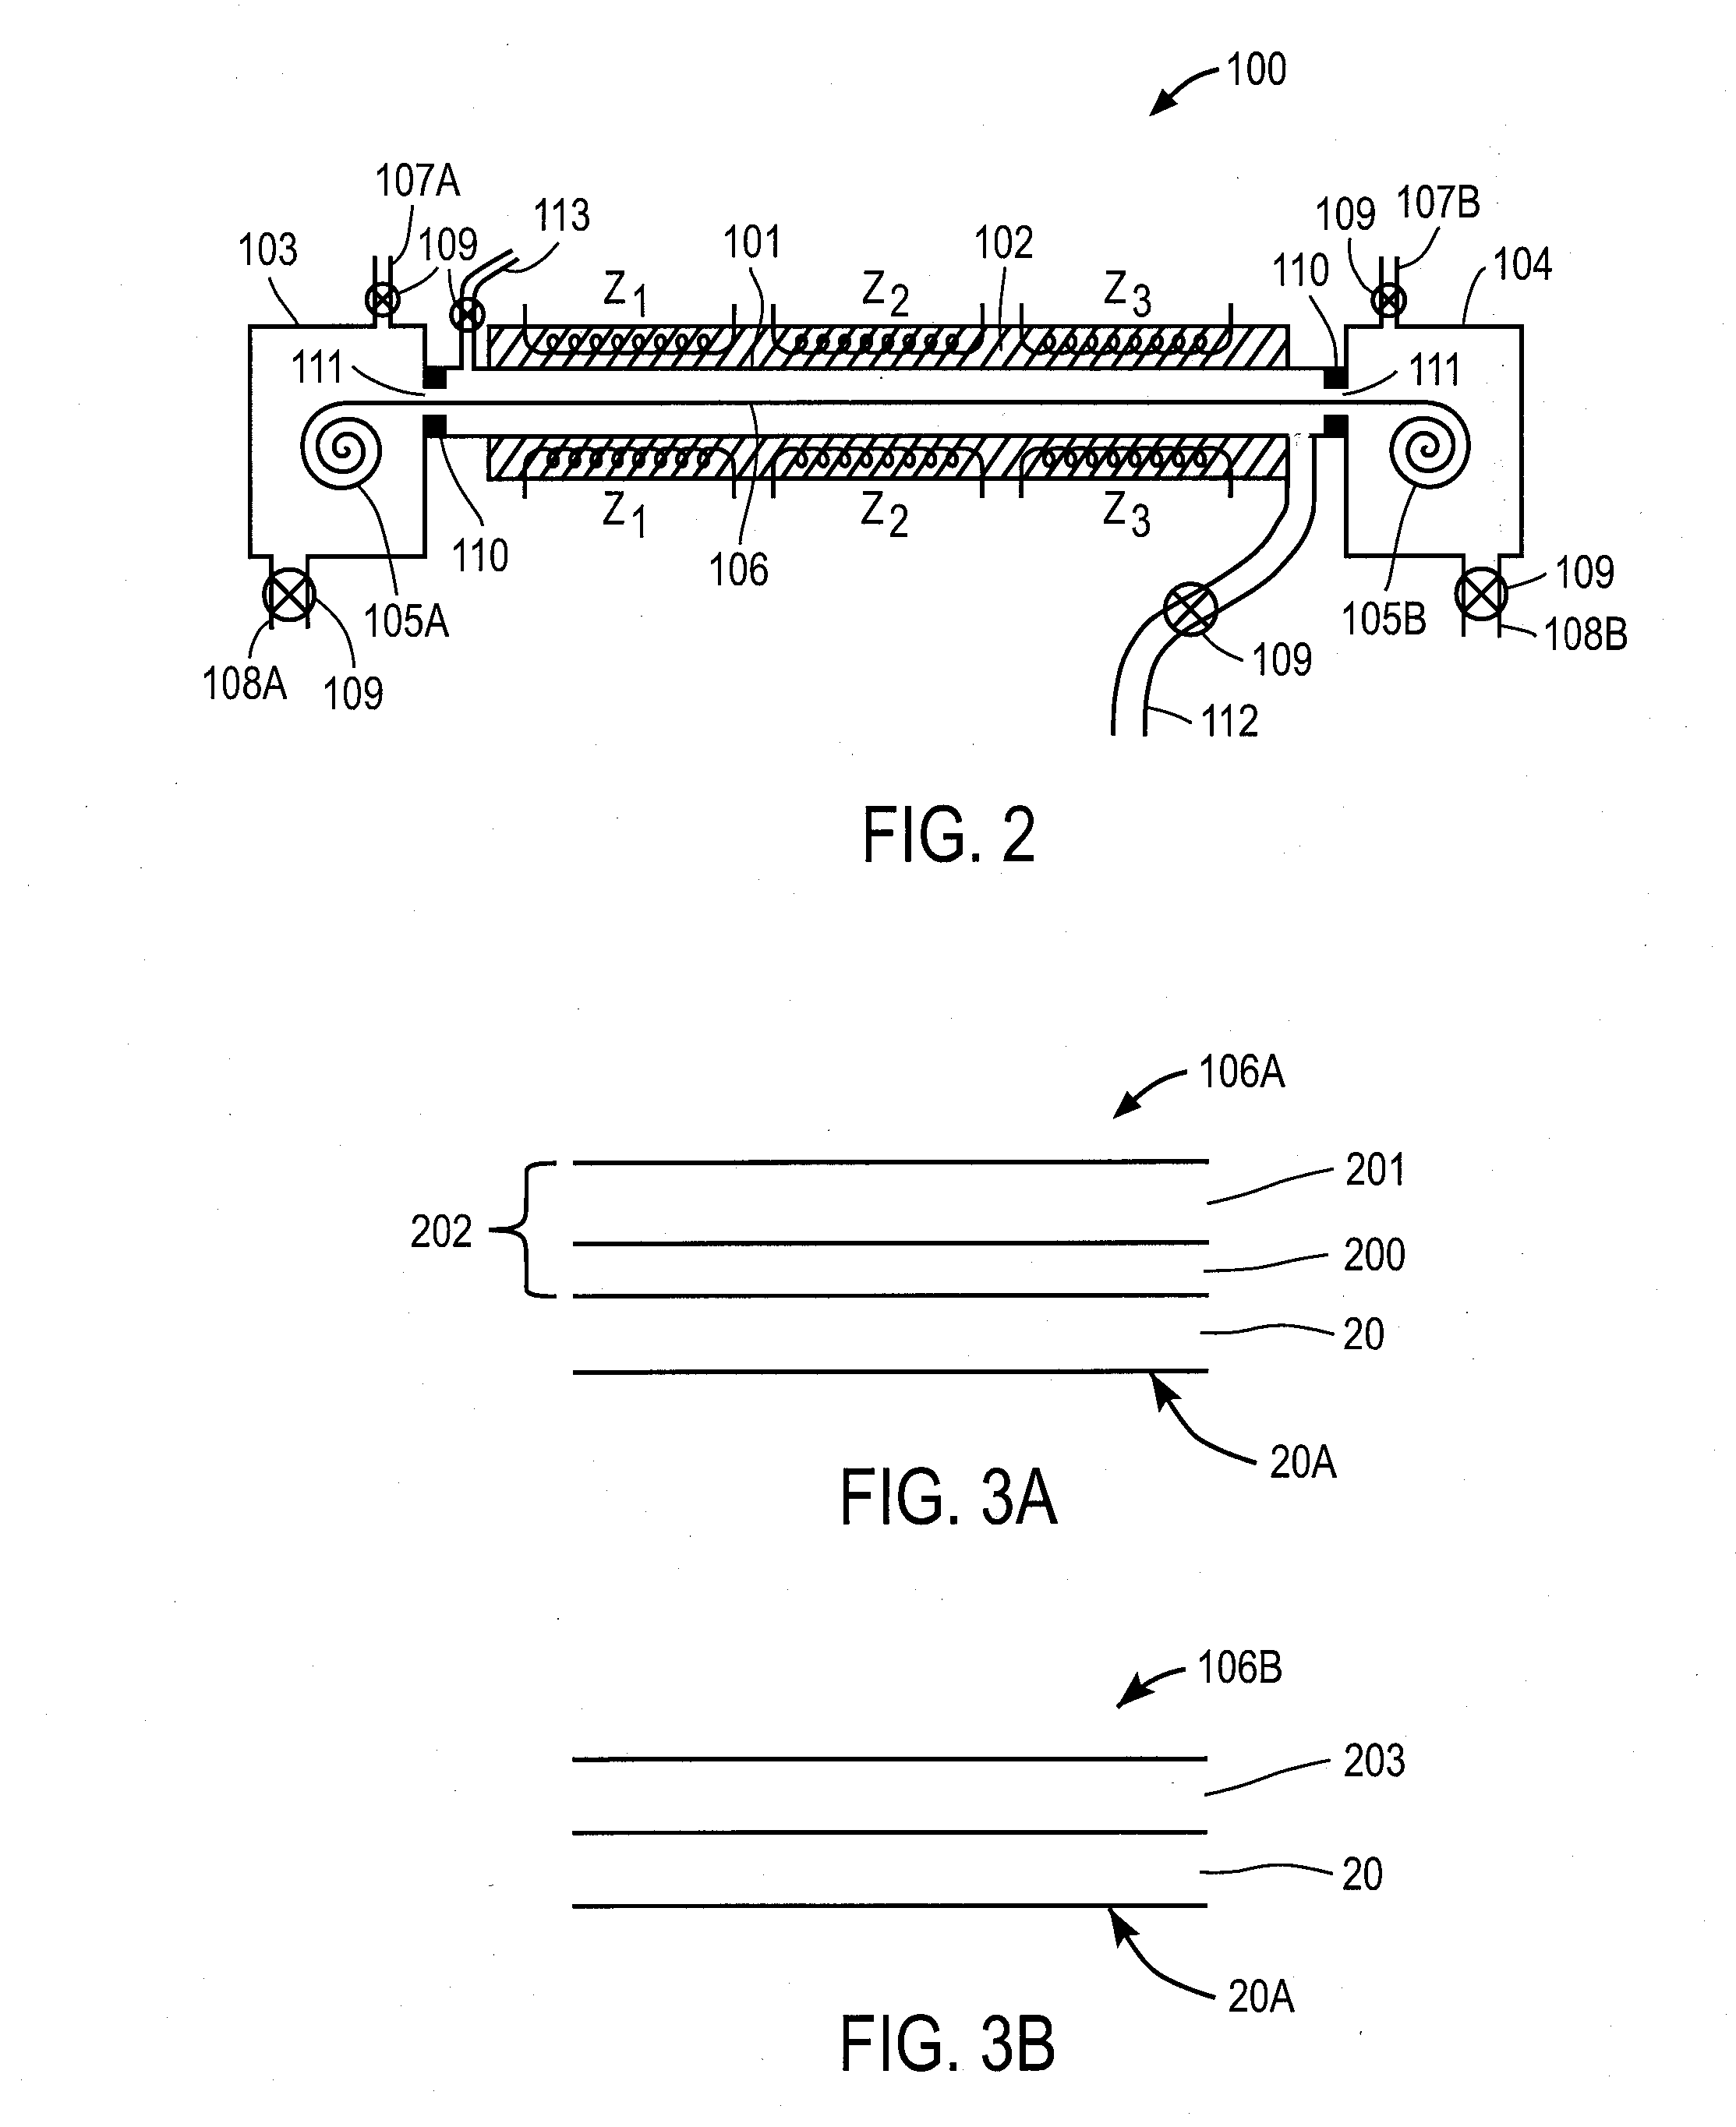 Roll-to-roll processing and tools for thin film solar cell manufacturing